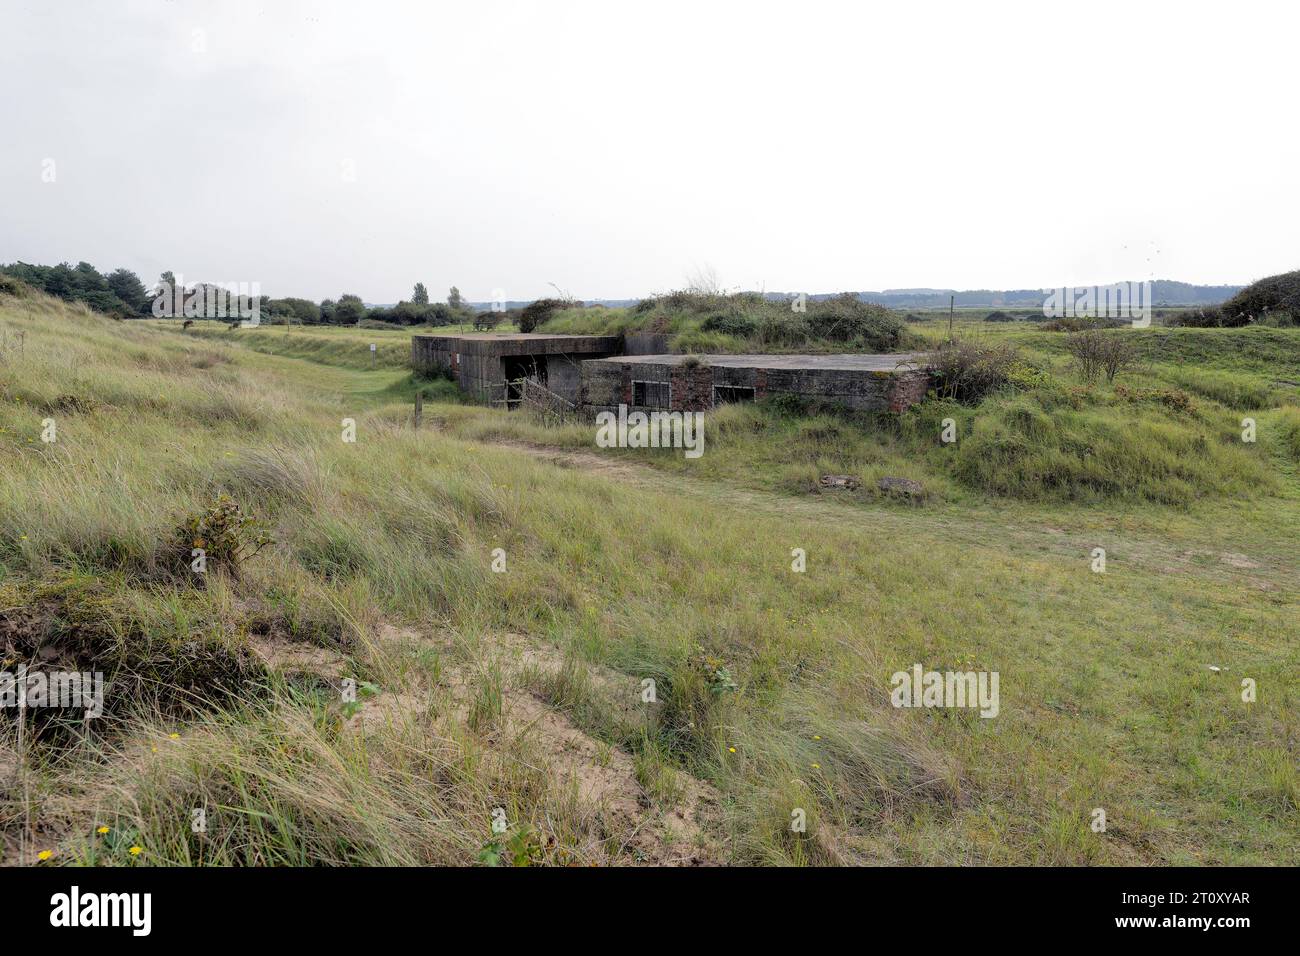 Ww2 military emplacement at holme dunes, norfolk Stock Photo